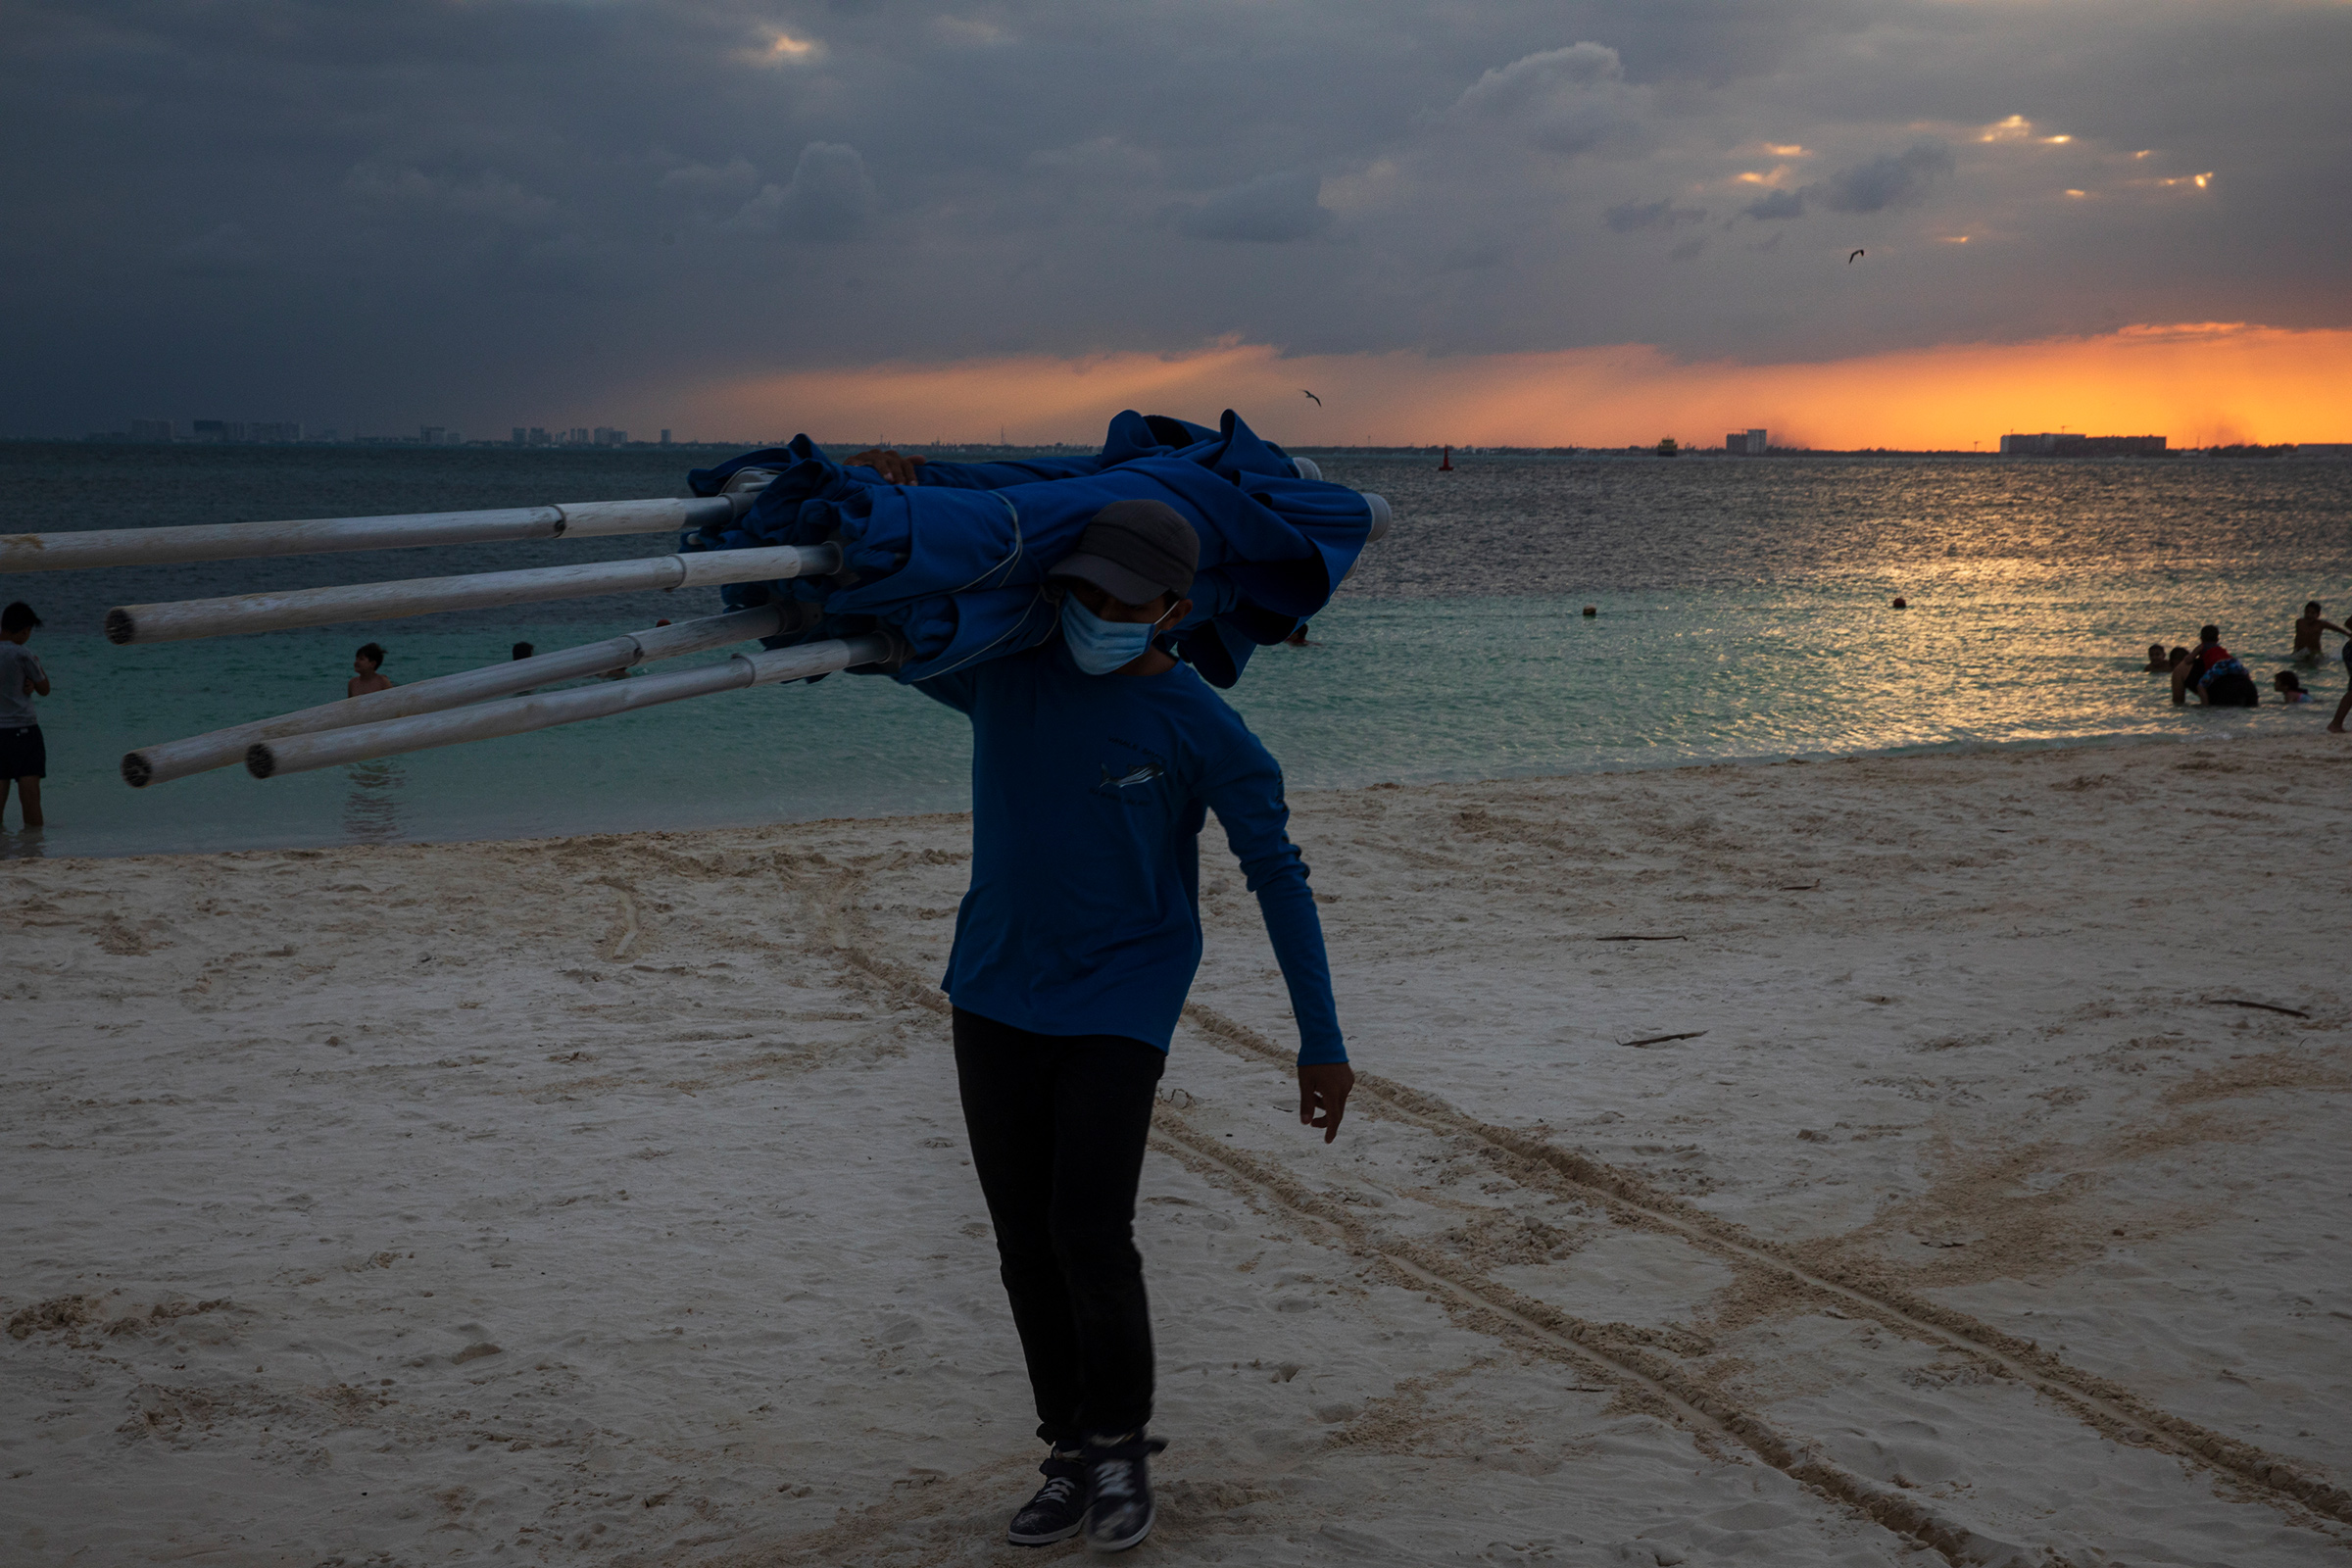 A worker collects beach umbrellas at the end of the day at Isla Mujeres, Quintana Roo, on Dec. 2. (Claudia Guadarrama—Magnum Foundation for TIME)